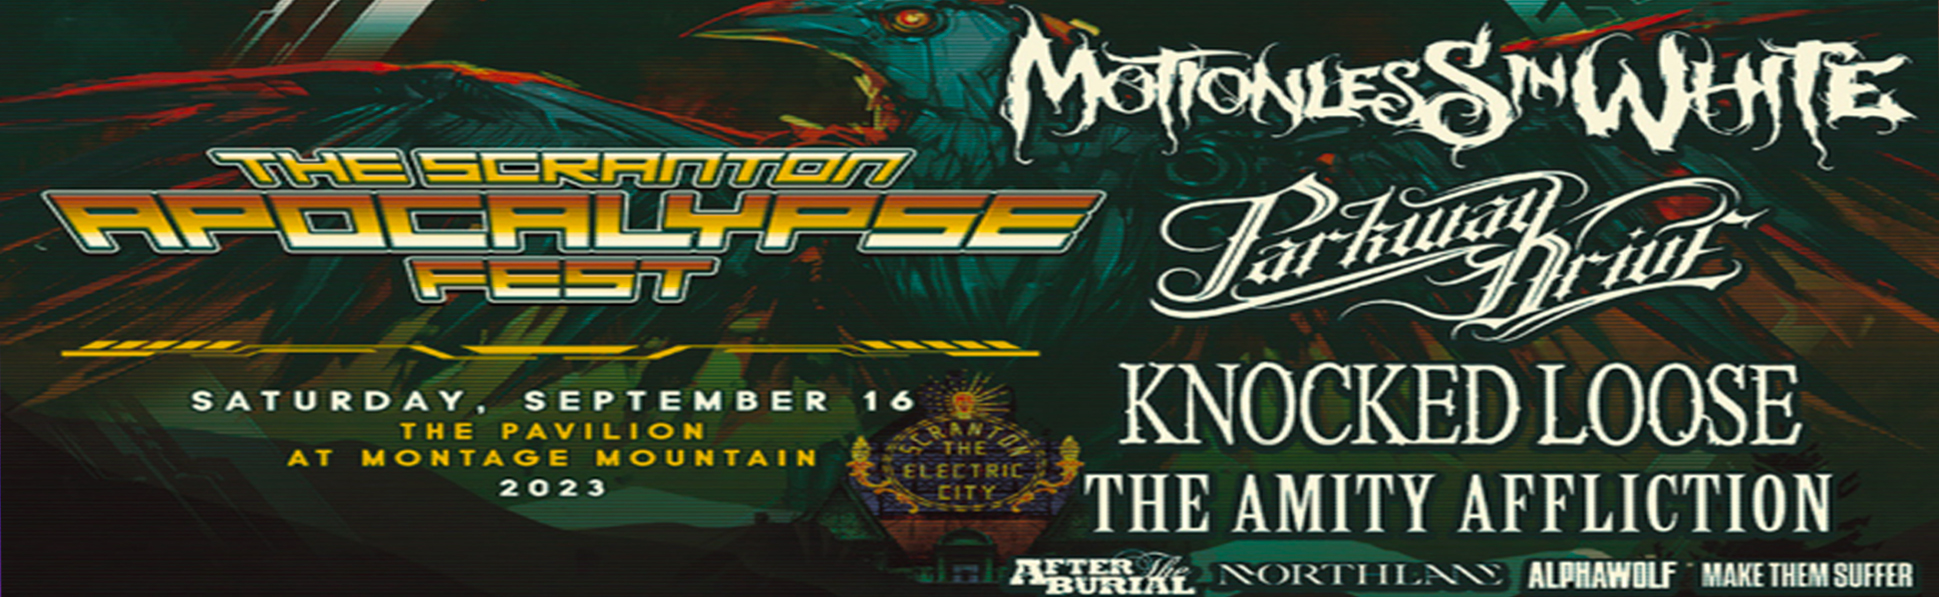 Scranton Apocalypse: Motionless In White, Parkway Drive, Knocked Loose &amp; The Amity Affliction